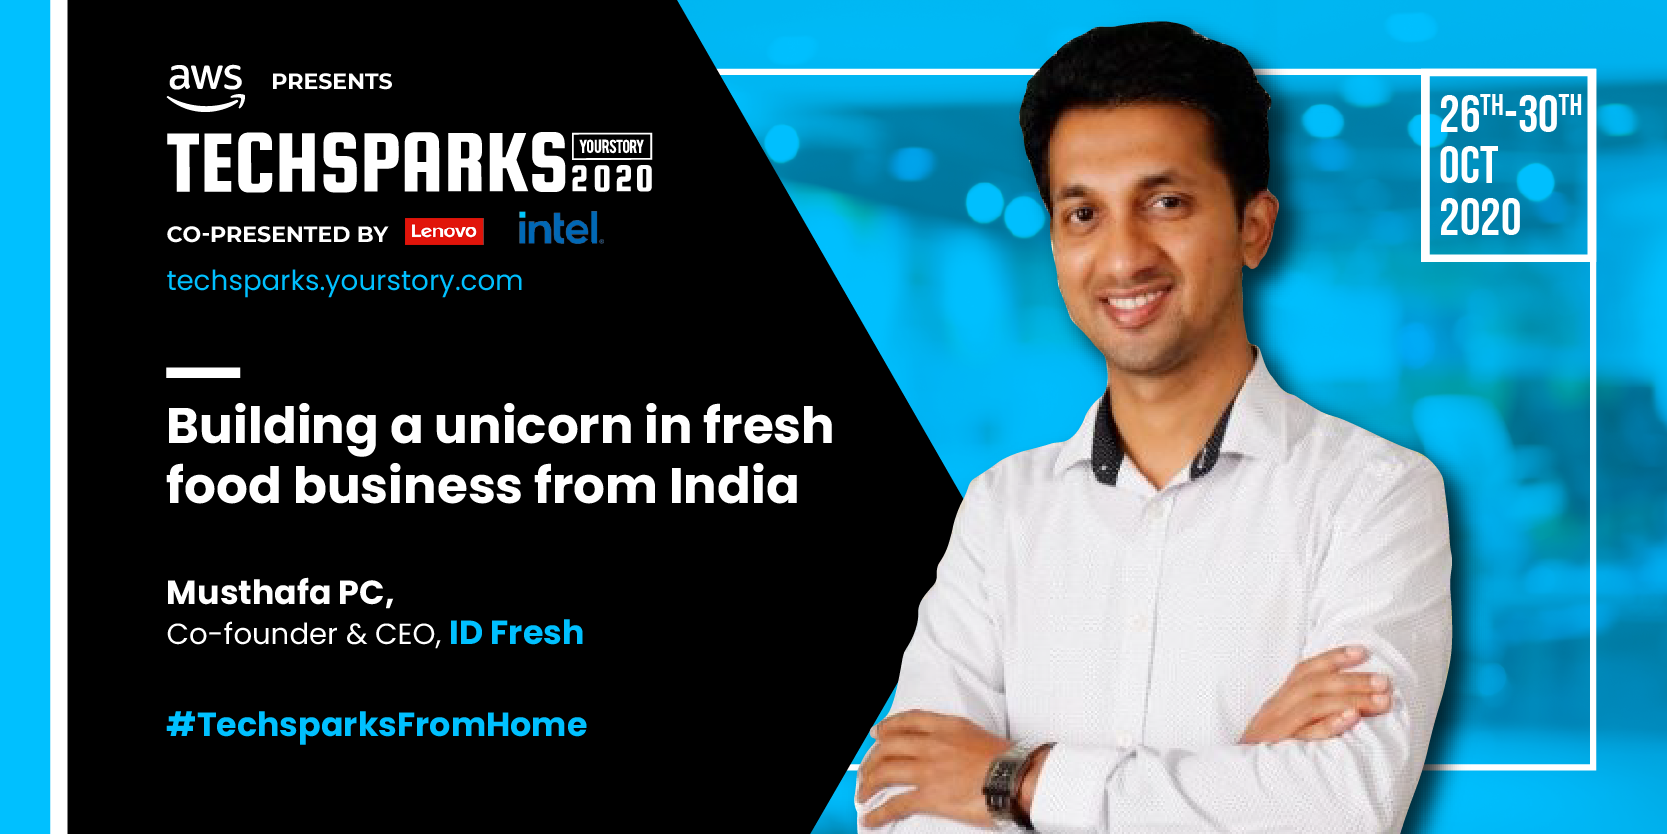 [TechSparks 2020] Product should be hero and other lessons in innovation from ID Fresh Food’s PC Musthafa 

